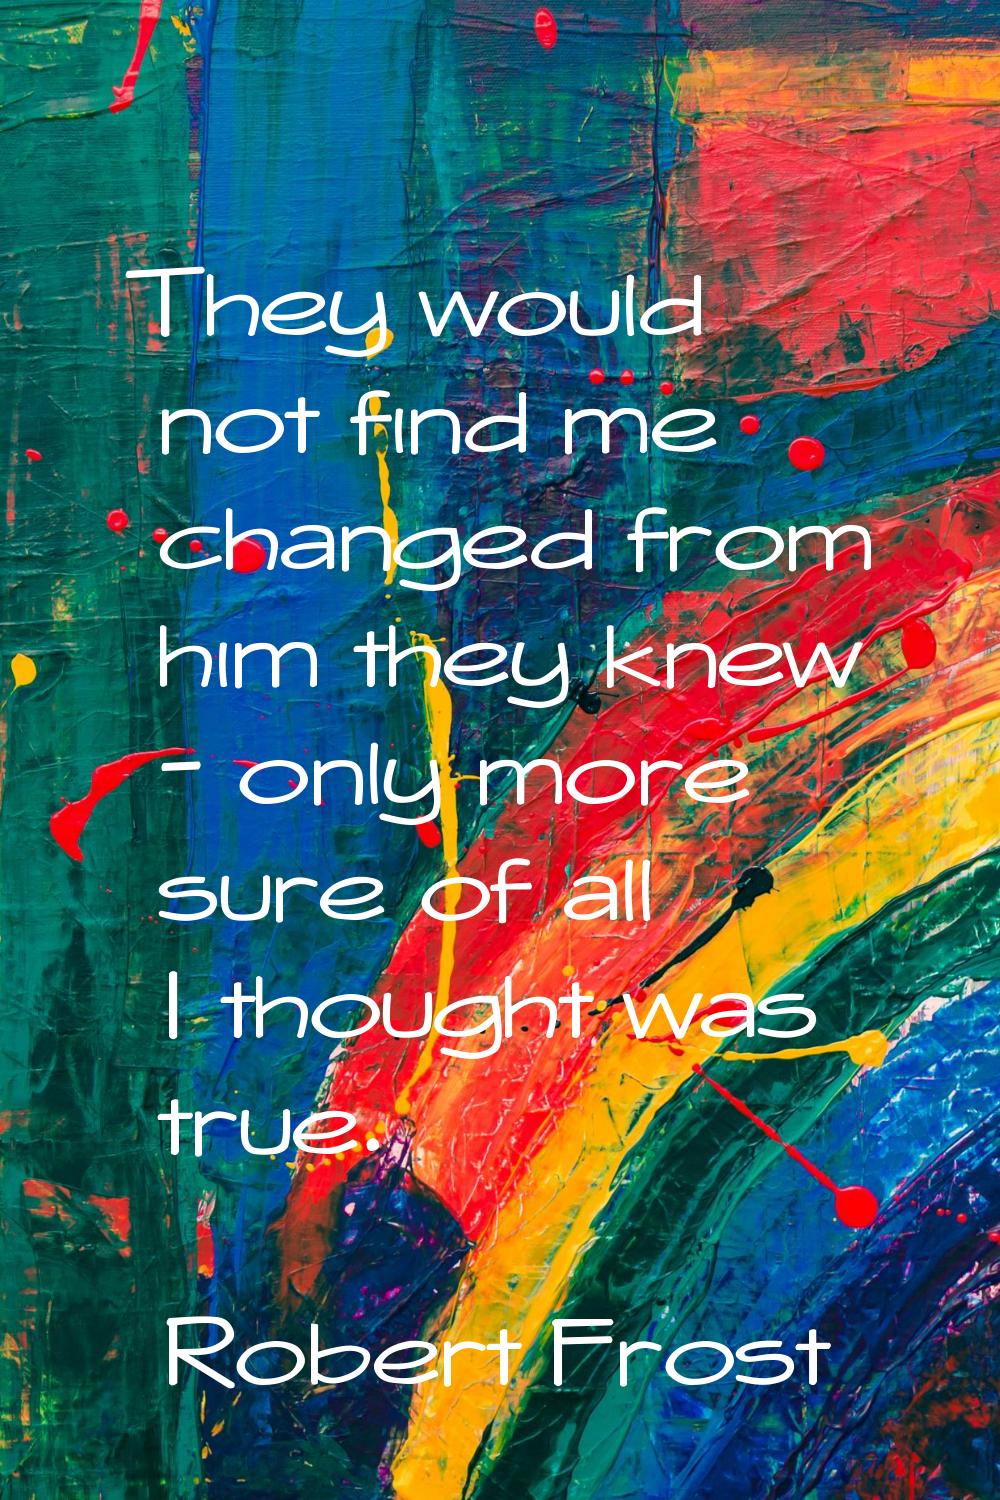 They would not find me changed from him they knew - only more sure of all I thought was true.